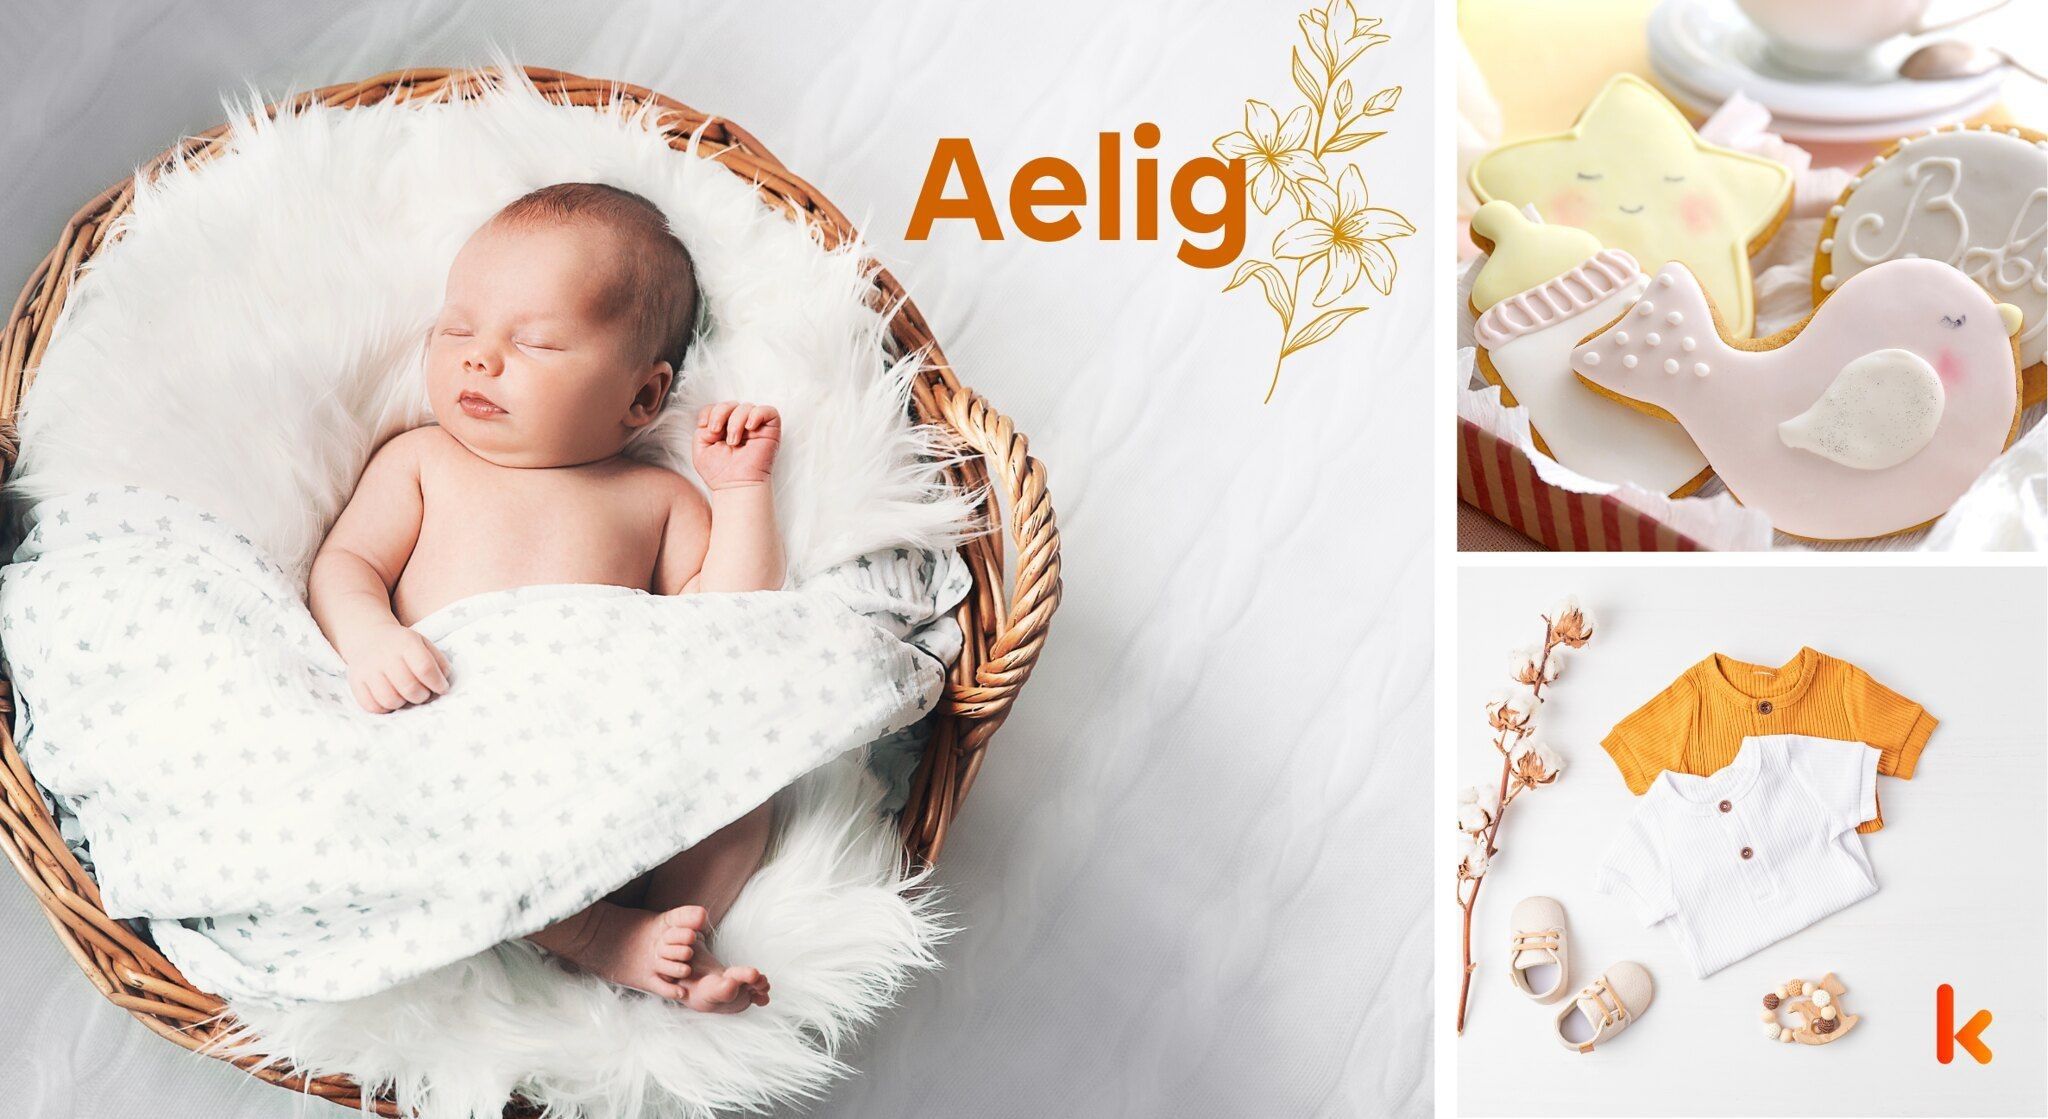 Meaning of the name Aelig